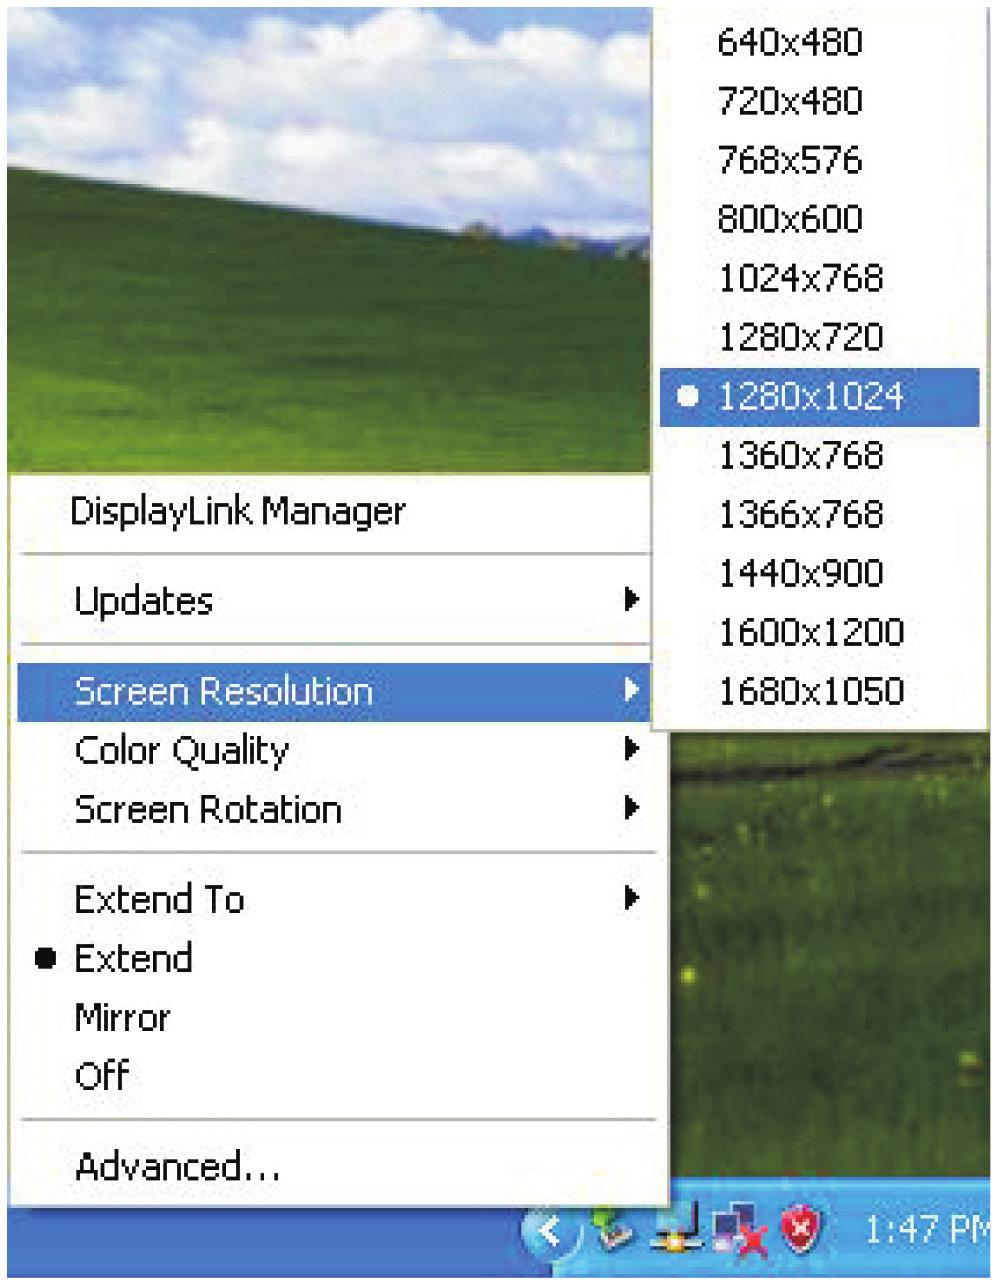 The utility allows you to quickly change the settings and resolution for DisplayLink Manager. Right-clicking the icon will launch its context menu.